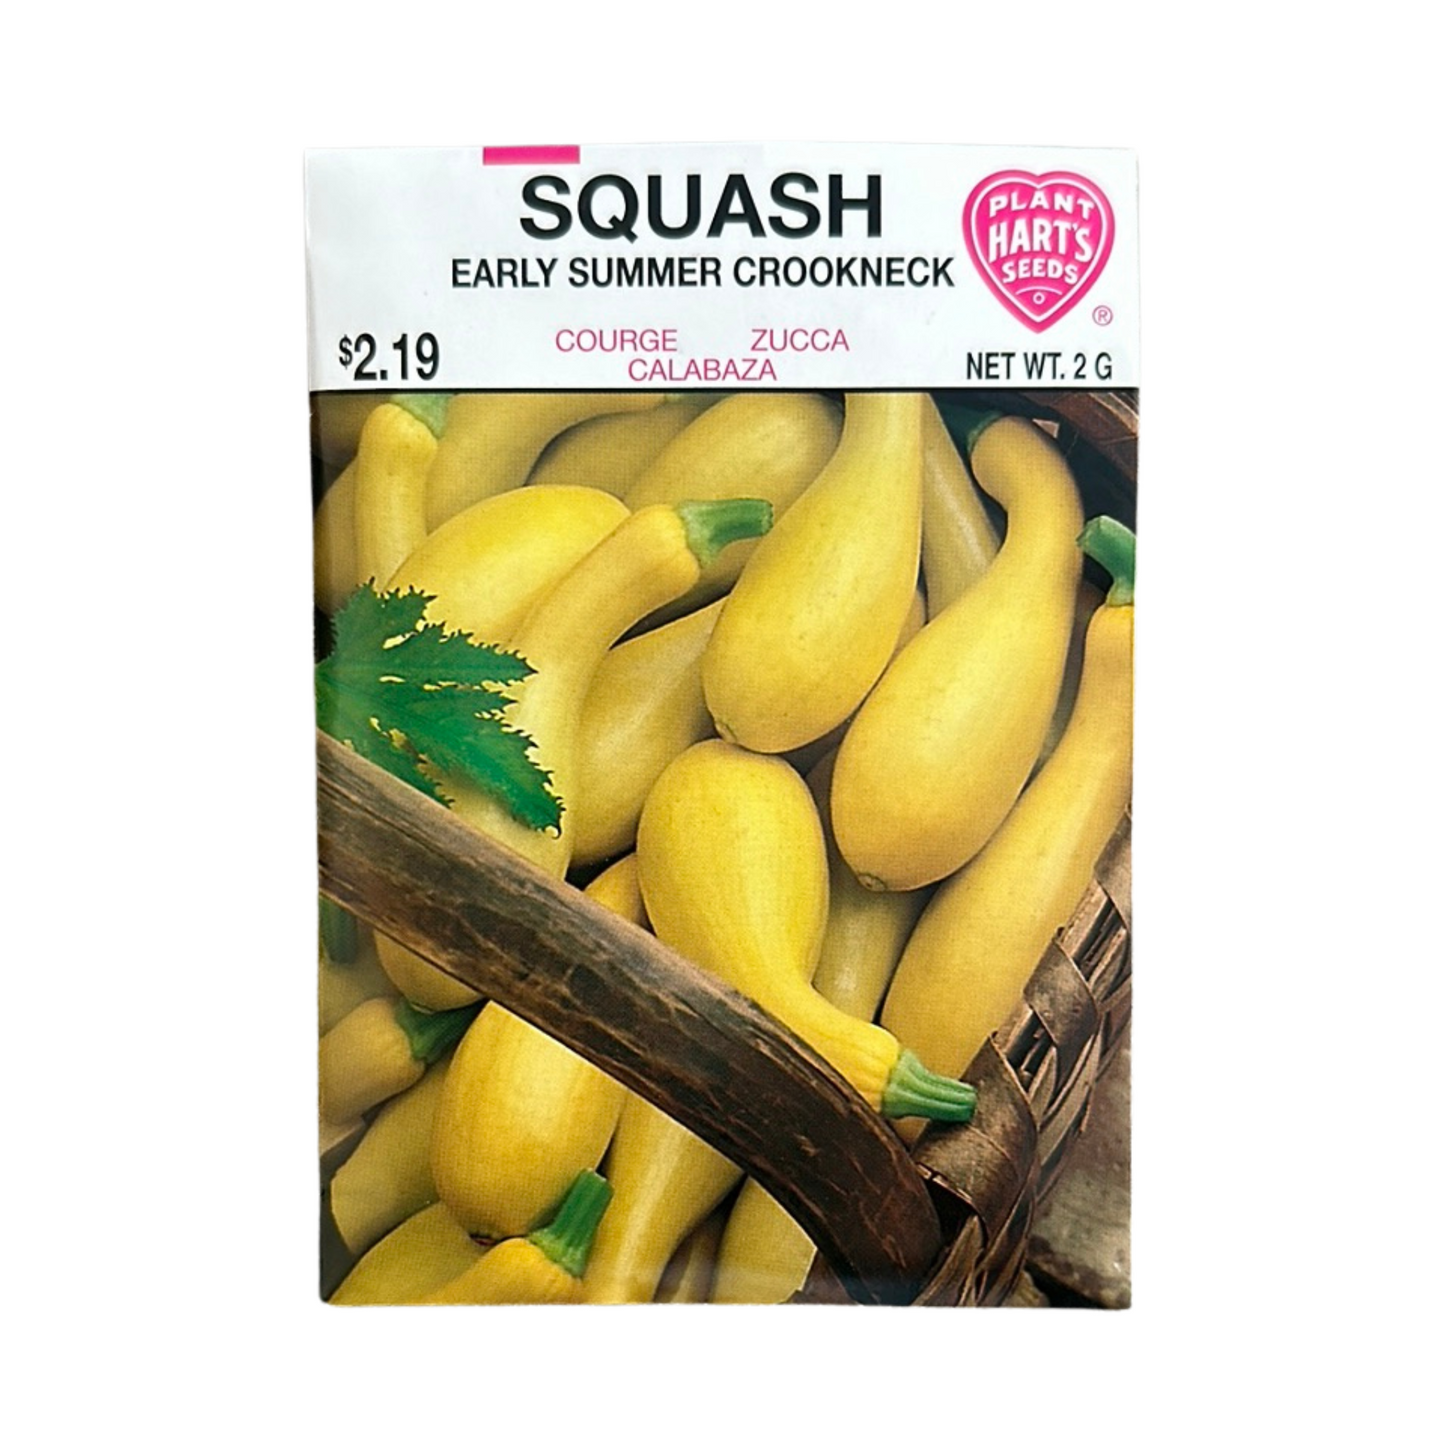 Squash Early Summer Crookneck